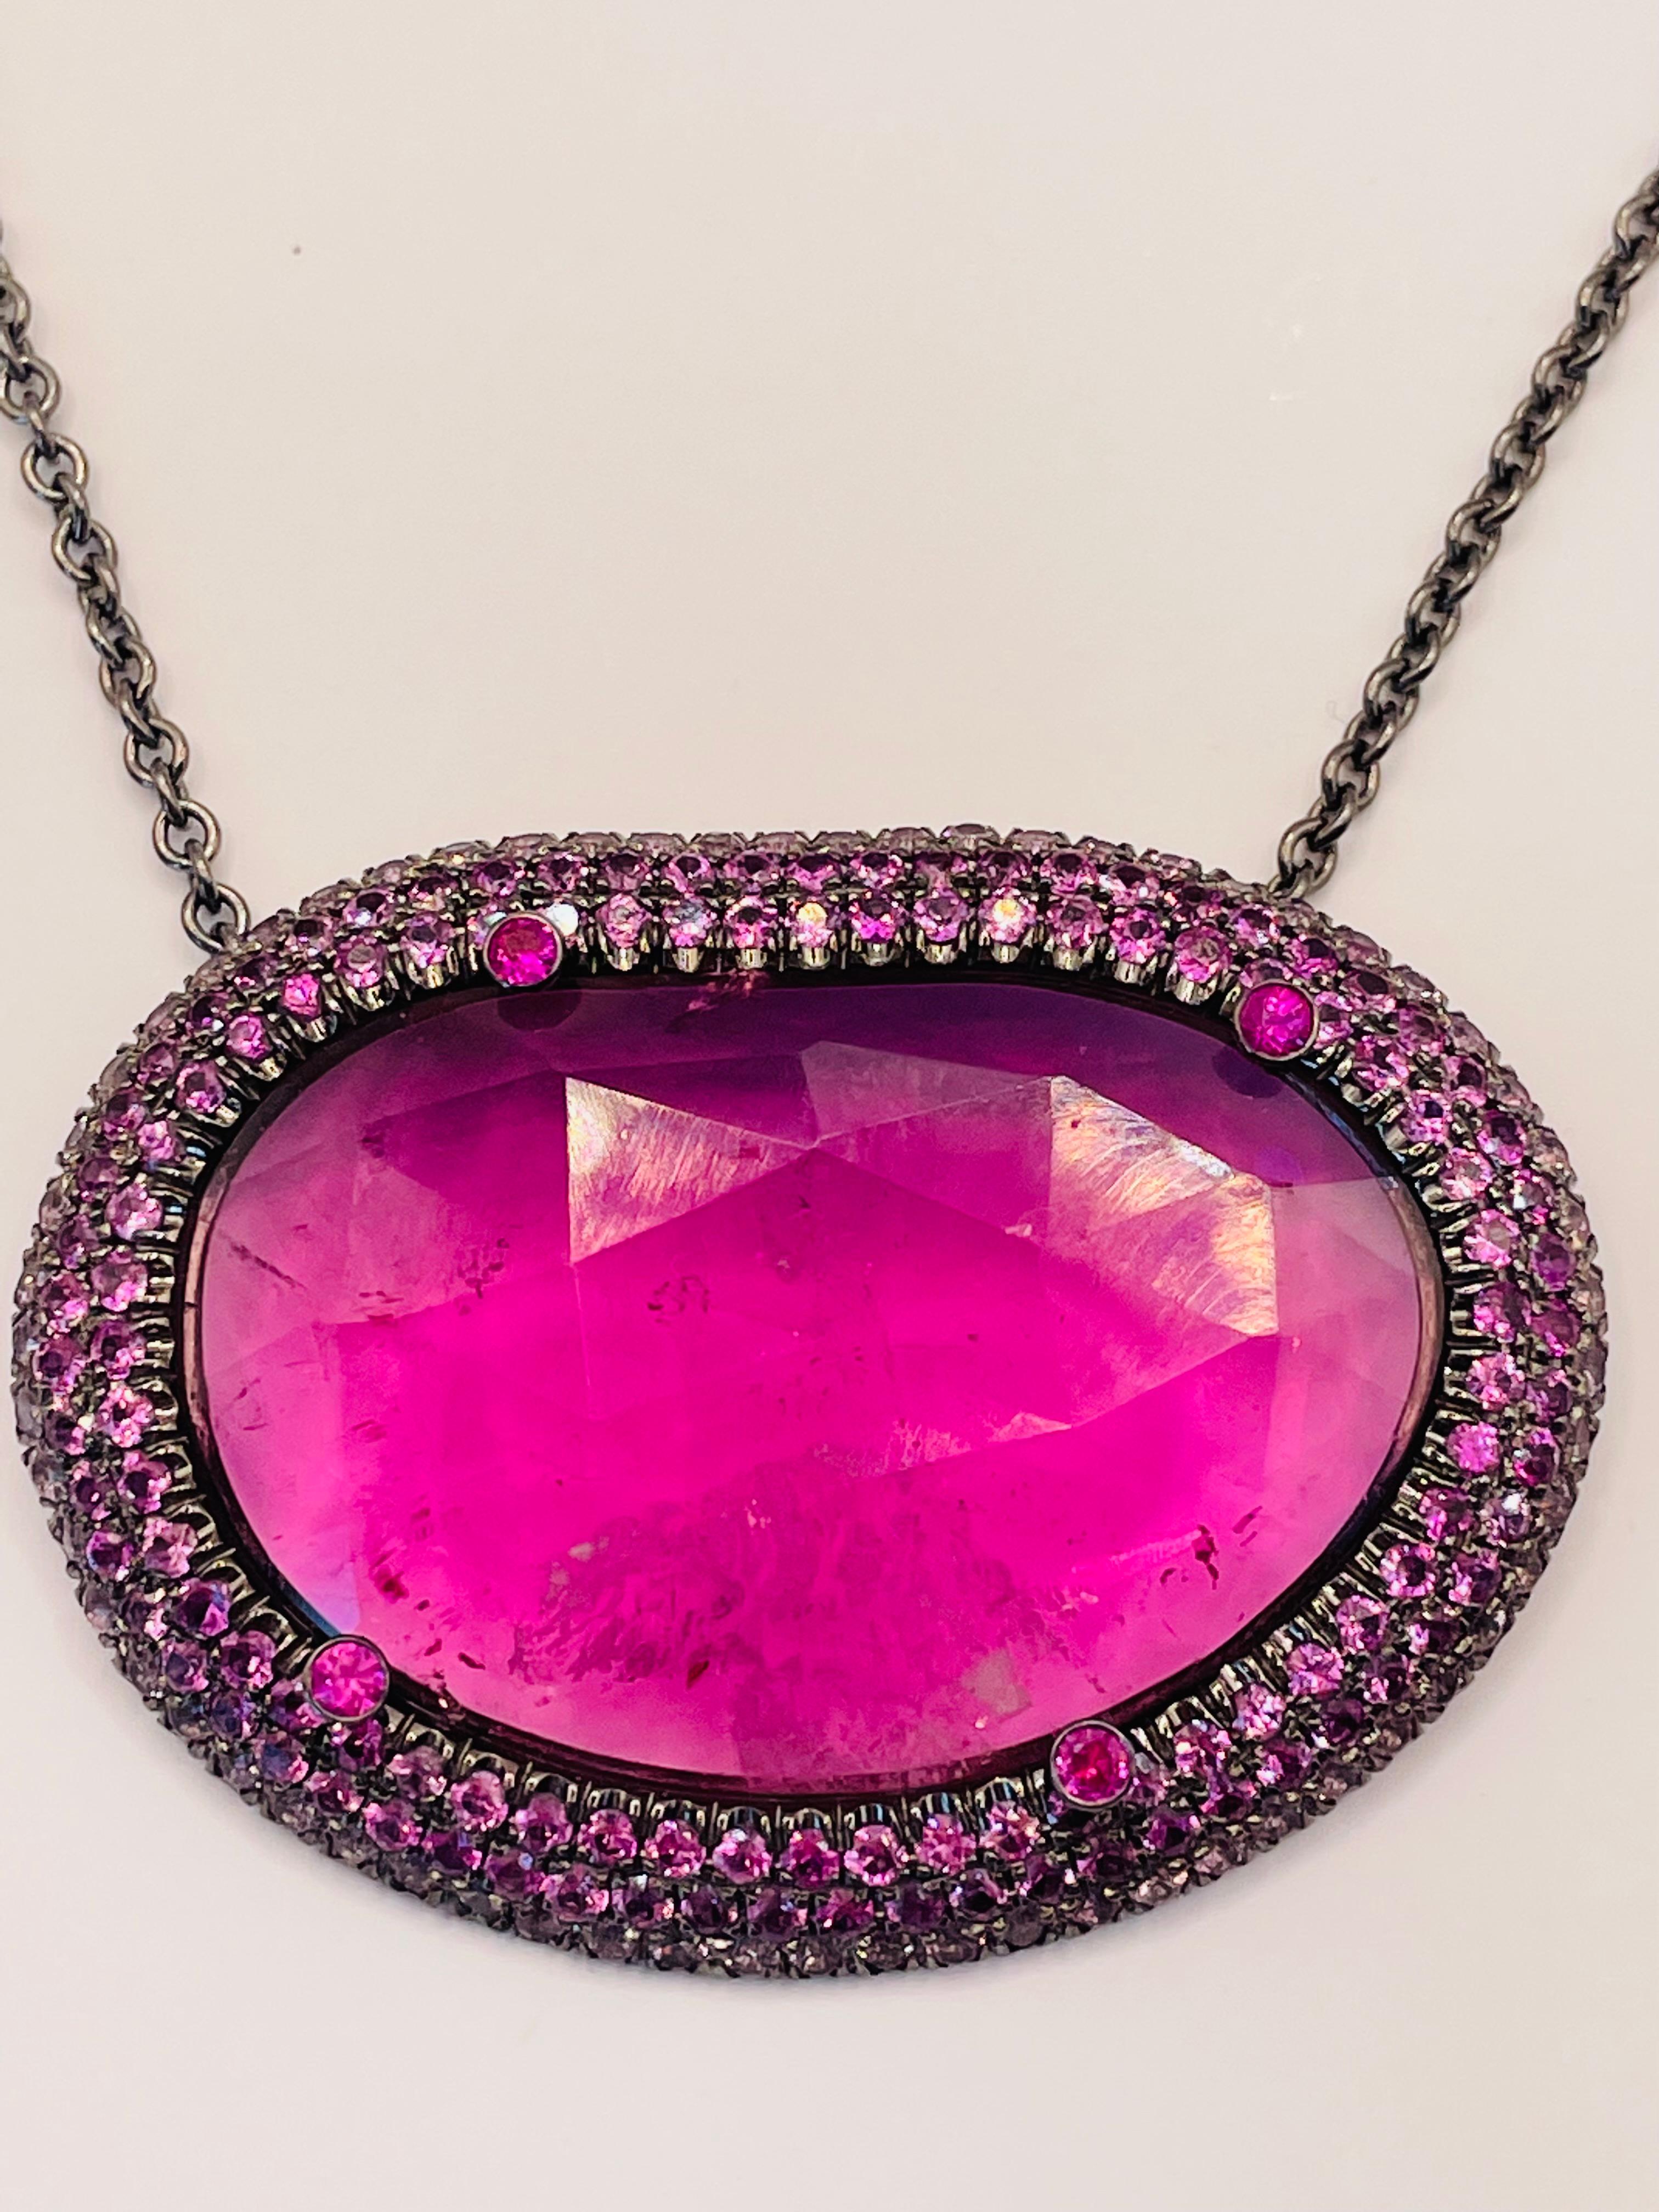 Women's Pink Tourmaline and Pink Sapphiers Necklace Byjulia Shlovsky For Sale